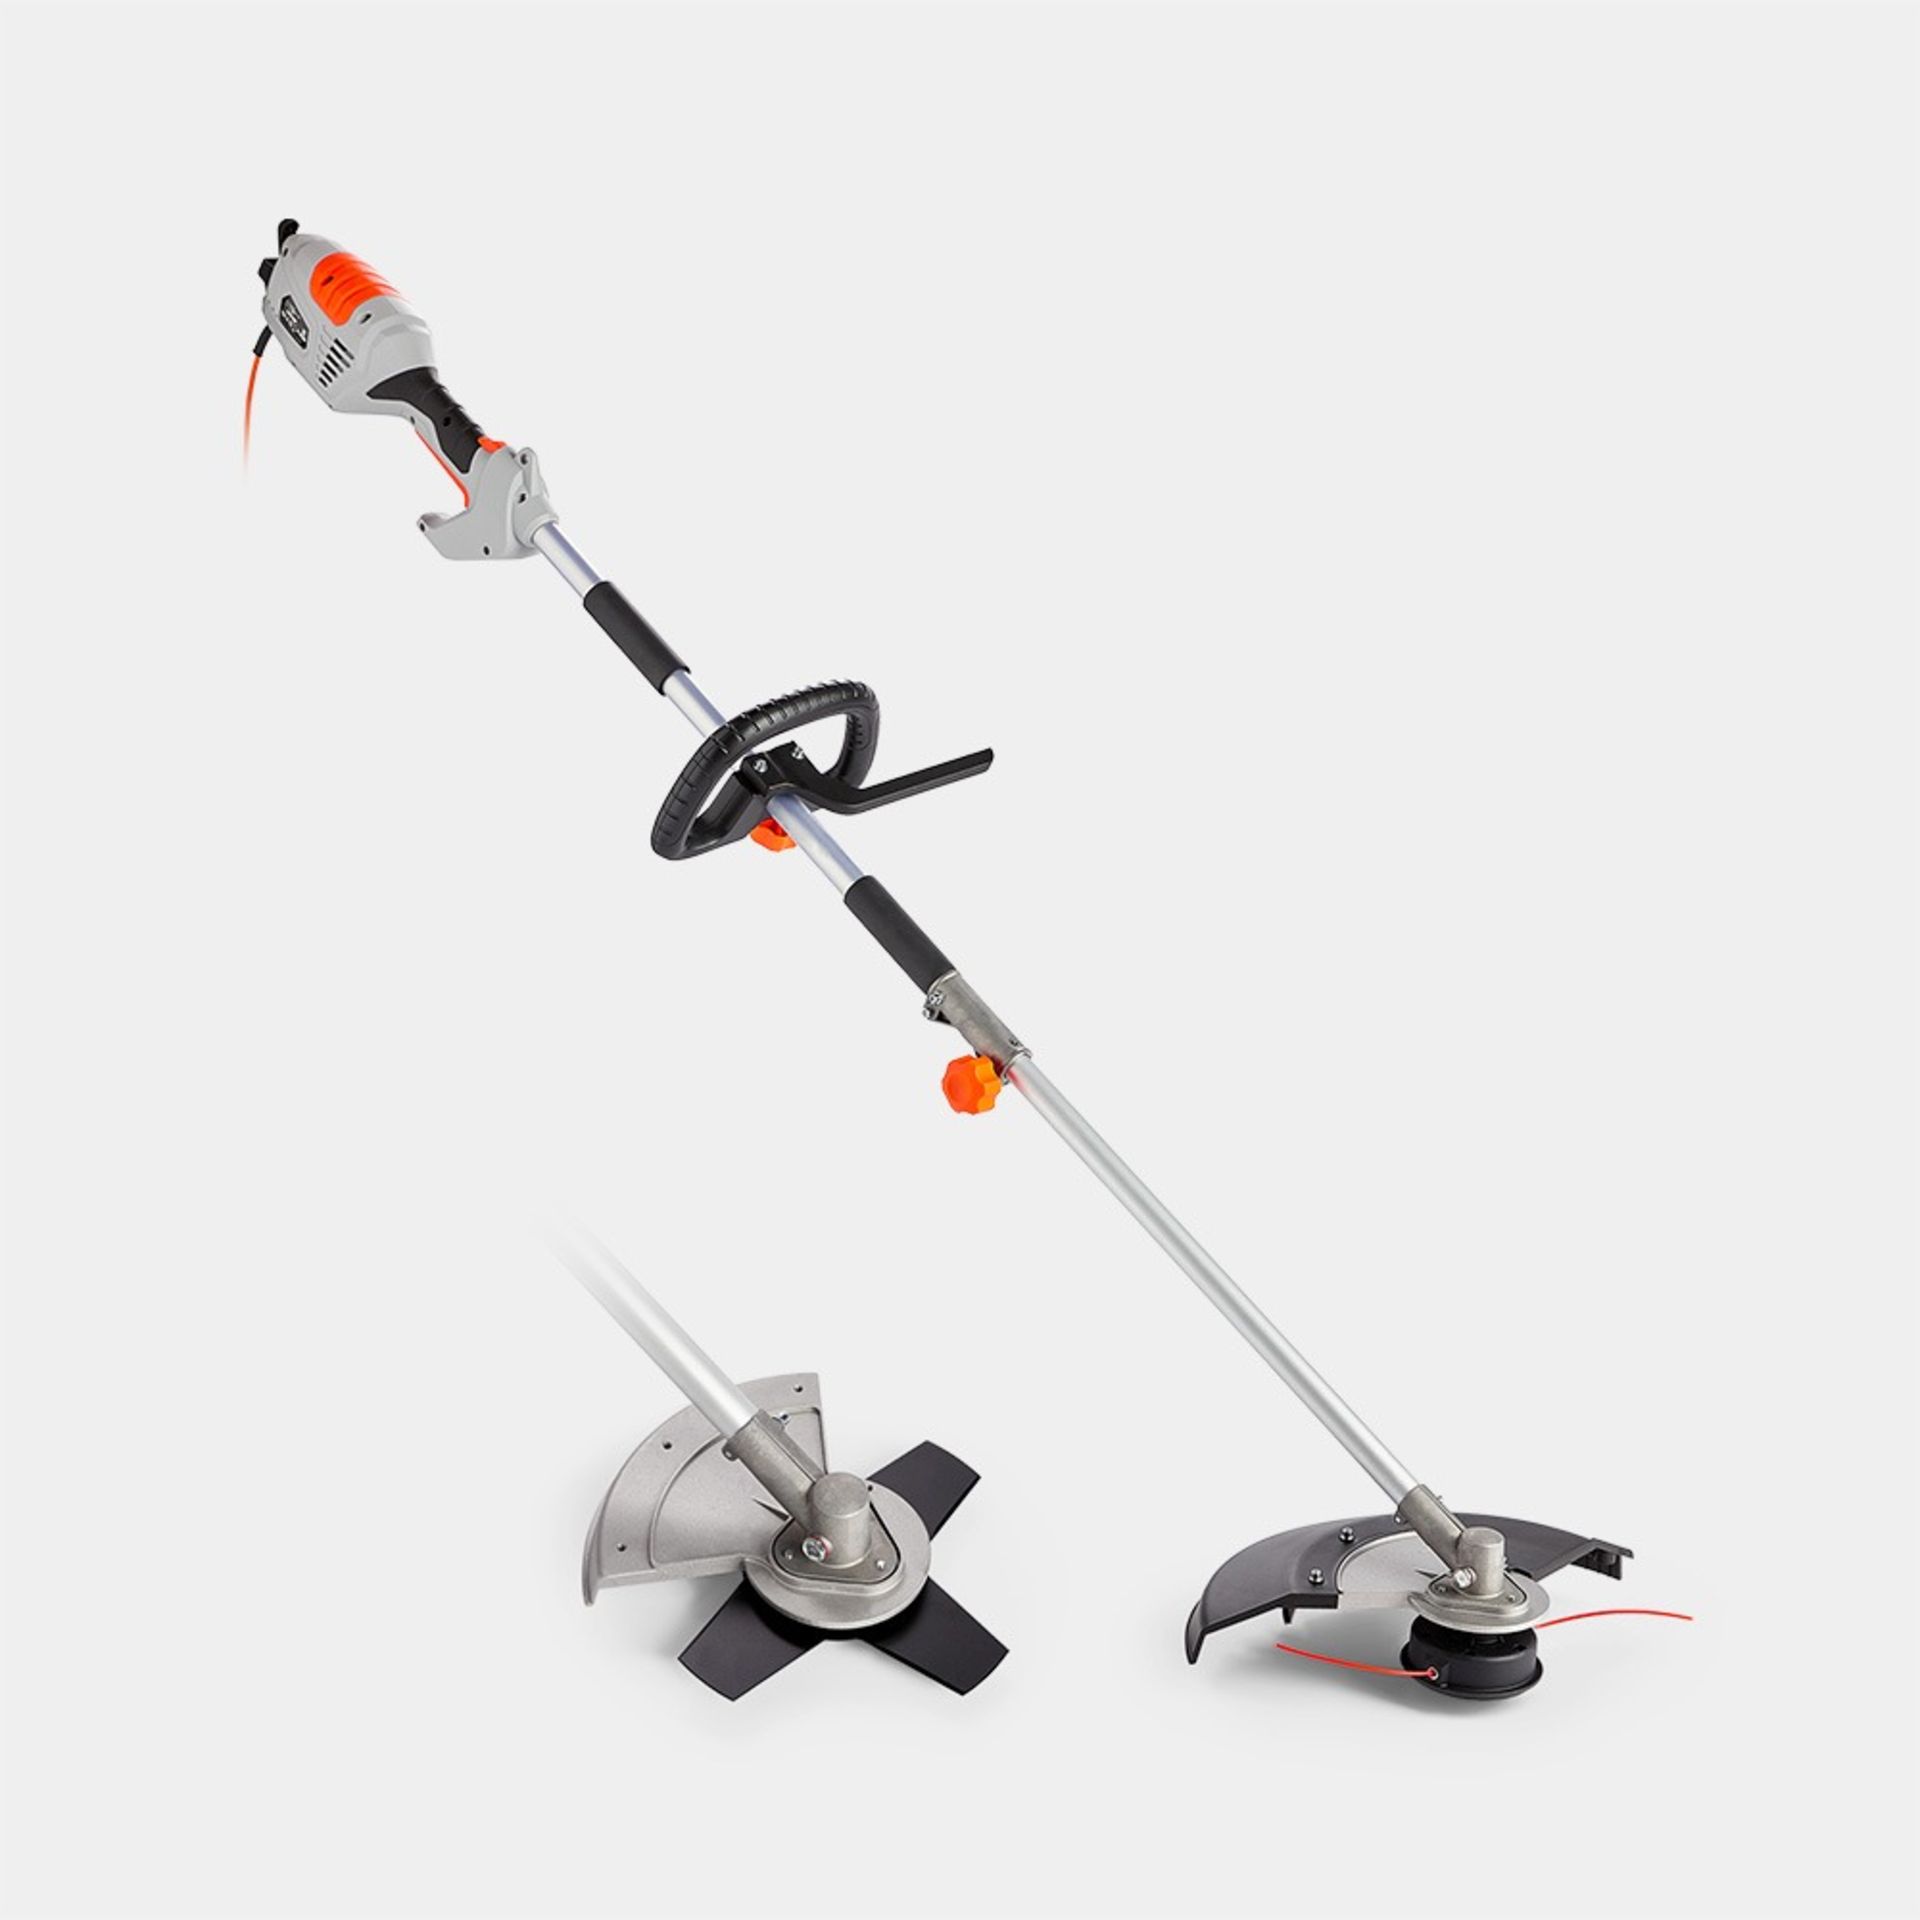 2 in 1 Hedge and Grass Trimmer - ER37